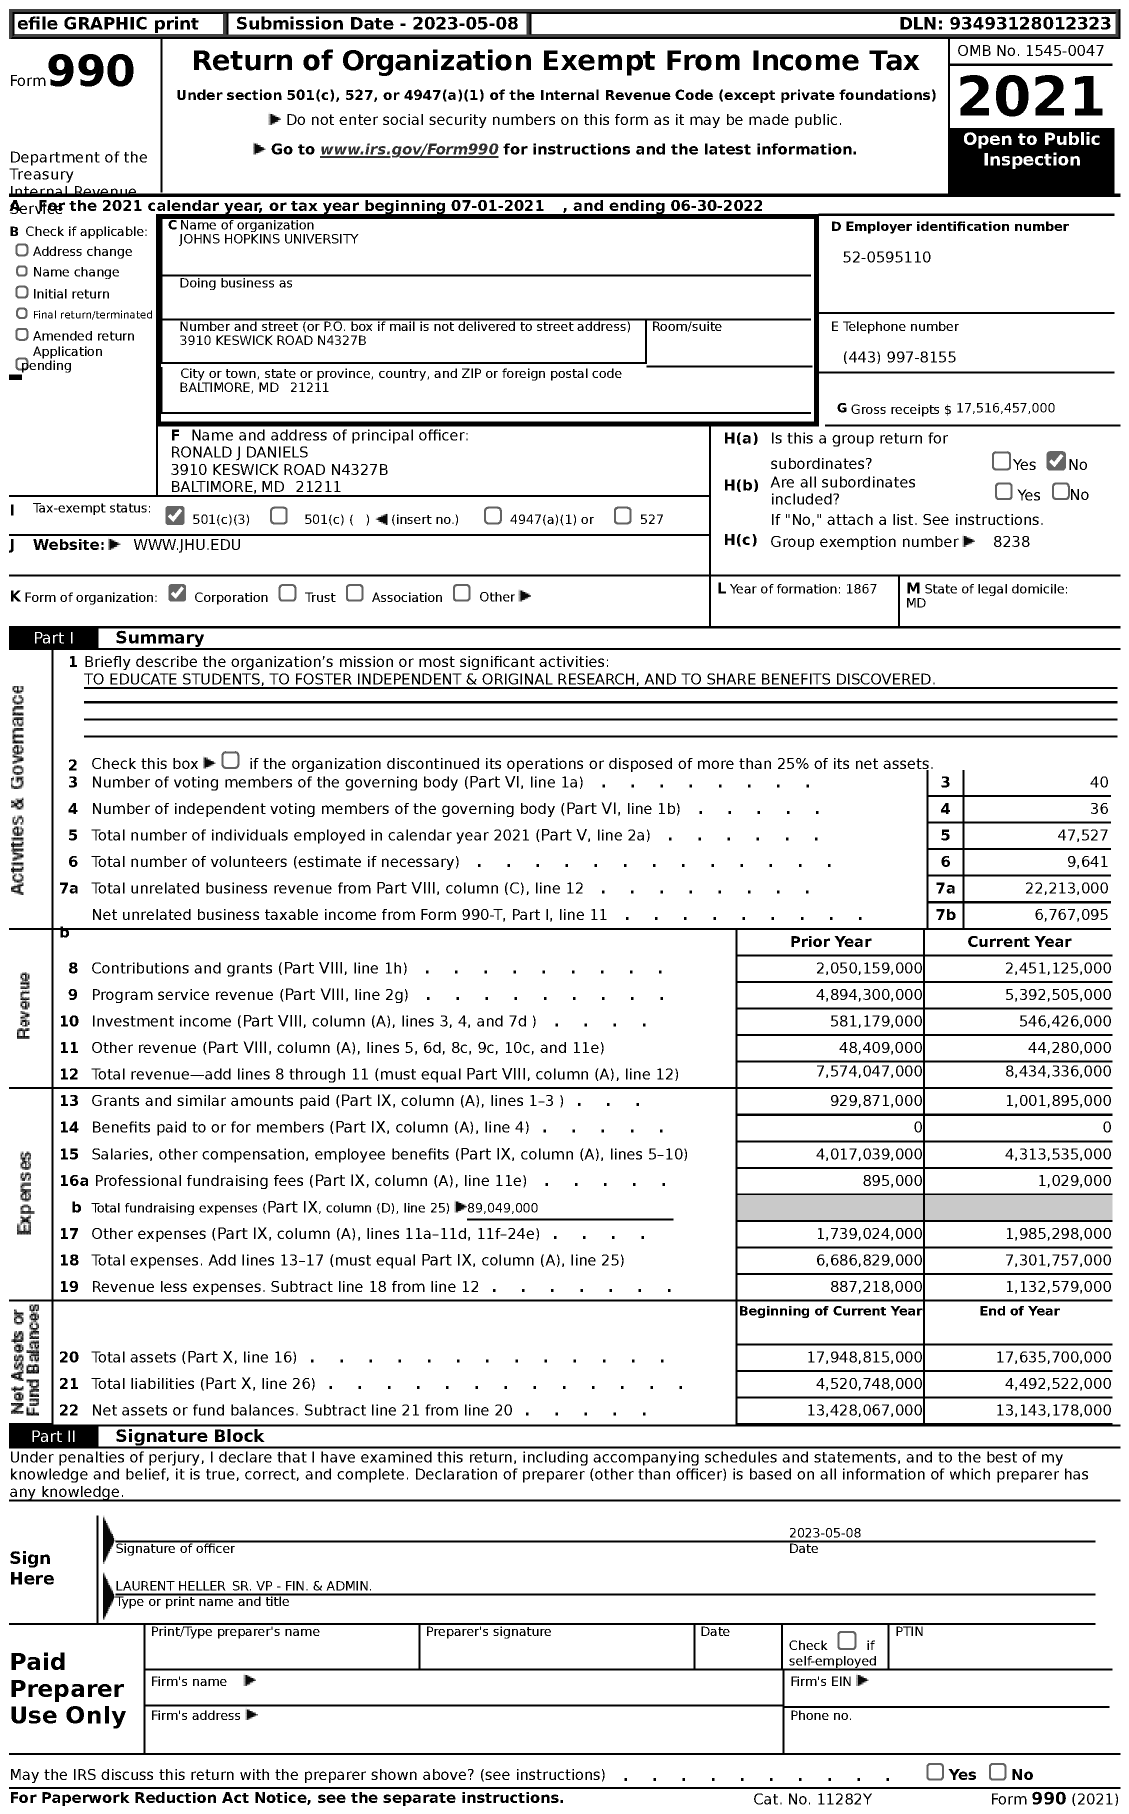 Image of first page of 2021 Form 990 for Johns Hopkins University (JHU)